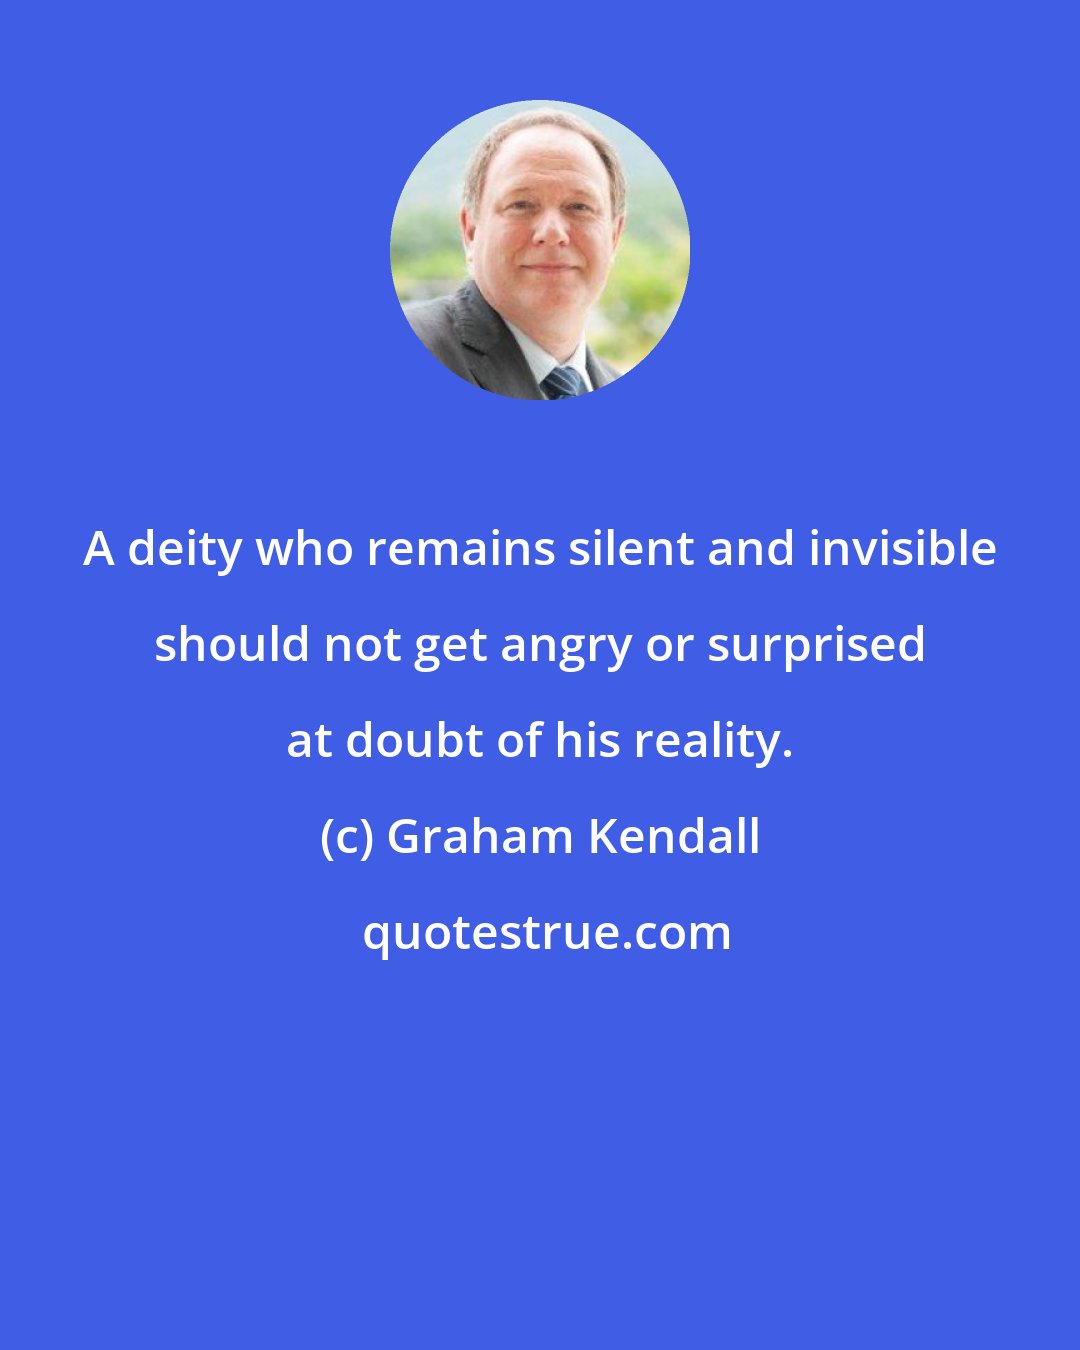 Graham Kendall: A deity who remains silent and invisible should not get angry or surprised at doubt of his reality.